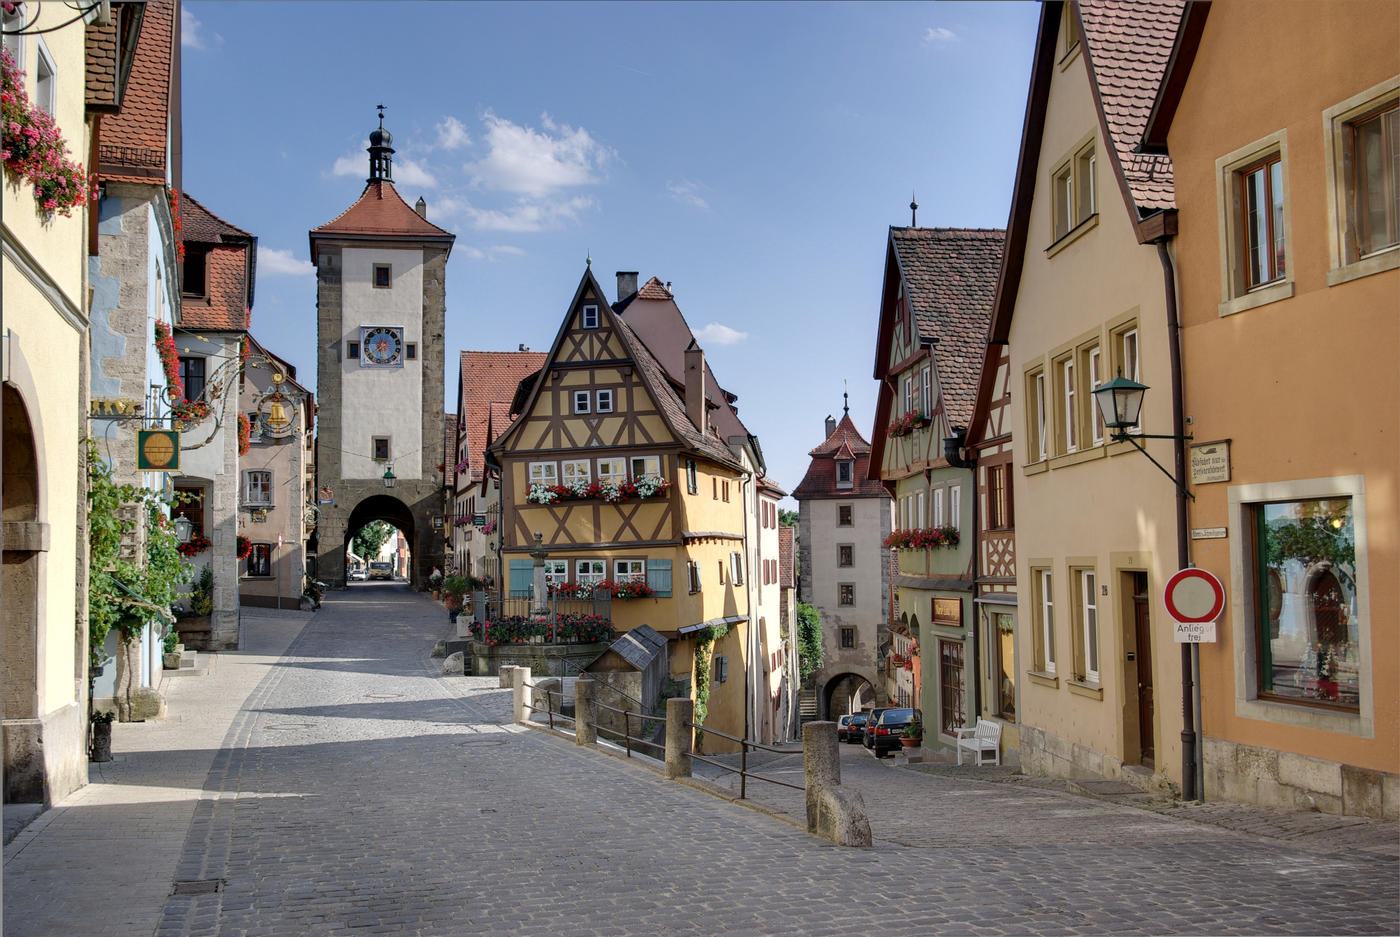 Rothenburg: Fairytale town of half-timbered houses